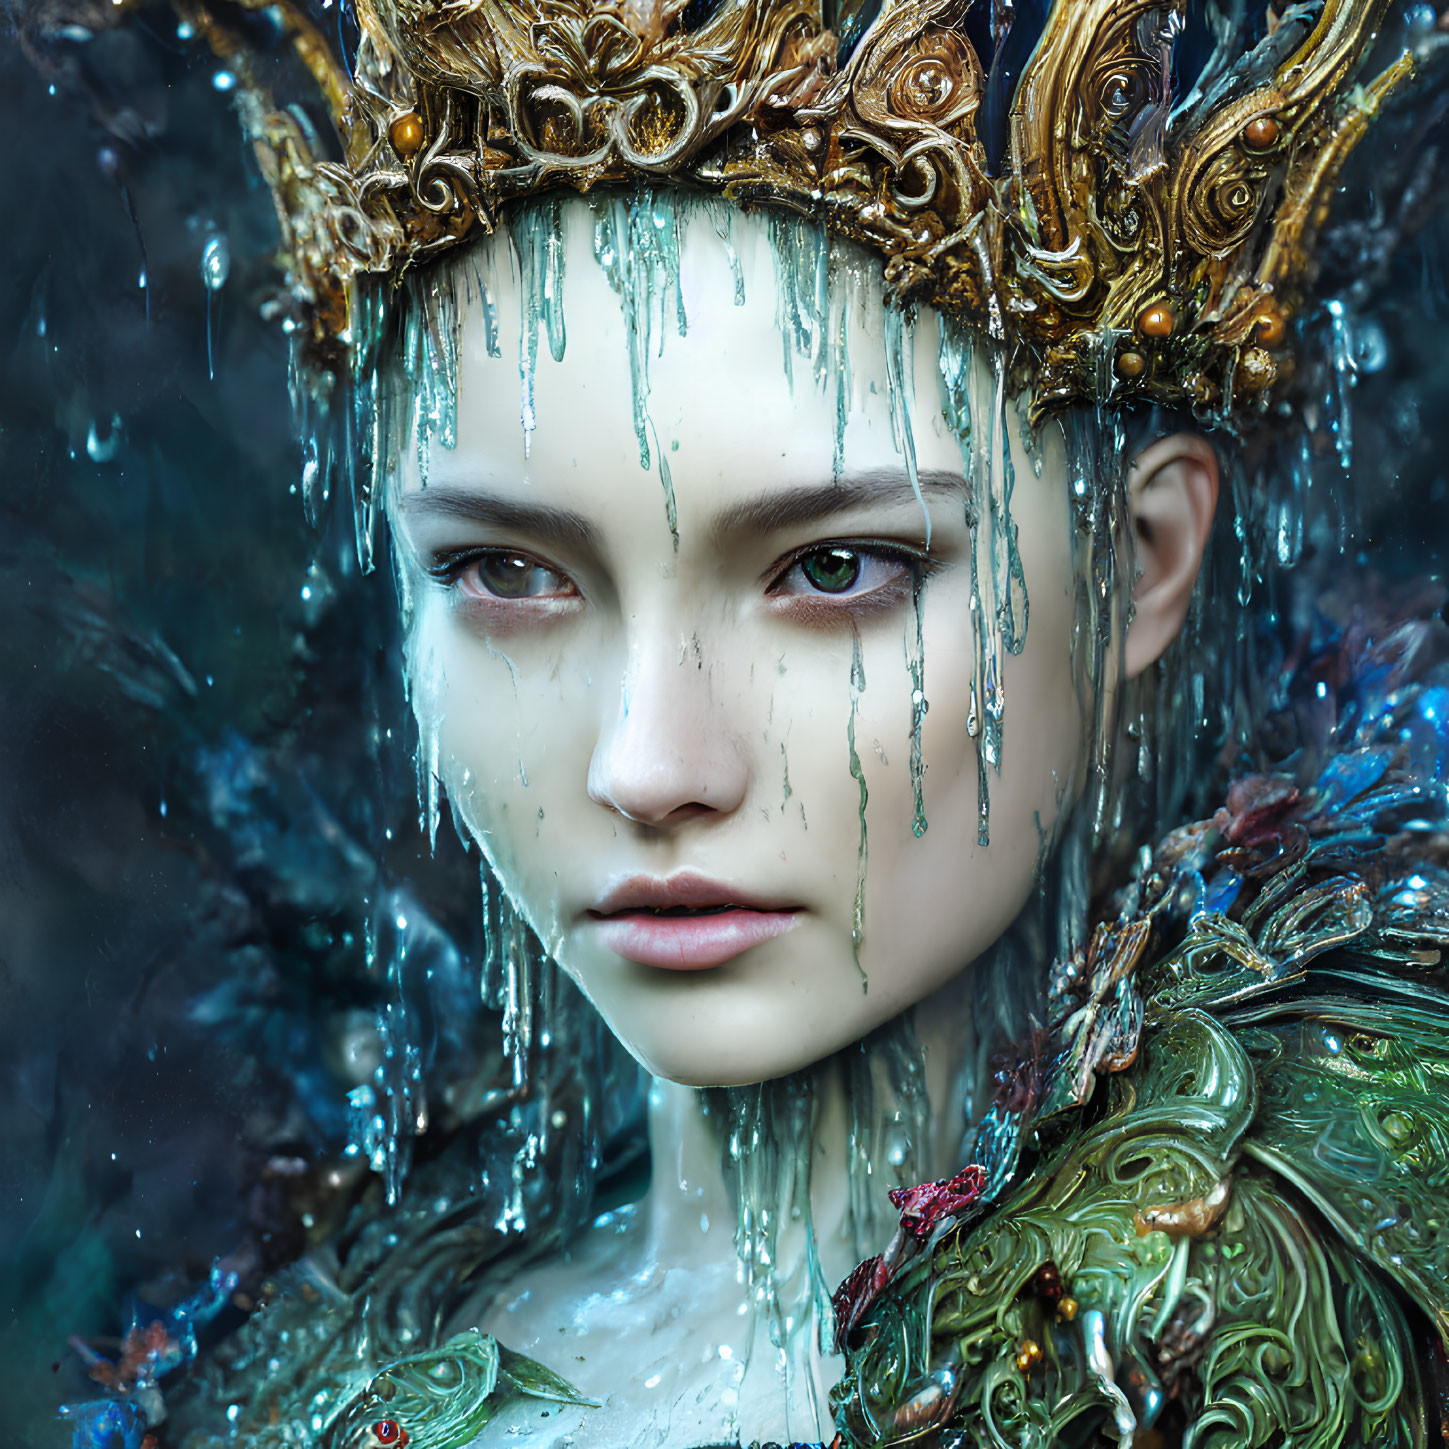 Regal figure in gilded crown and armor with ethereal gaze and green amphibian